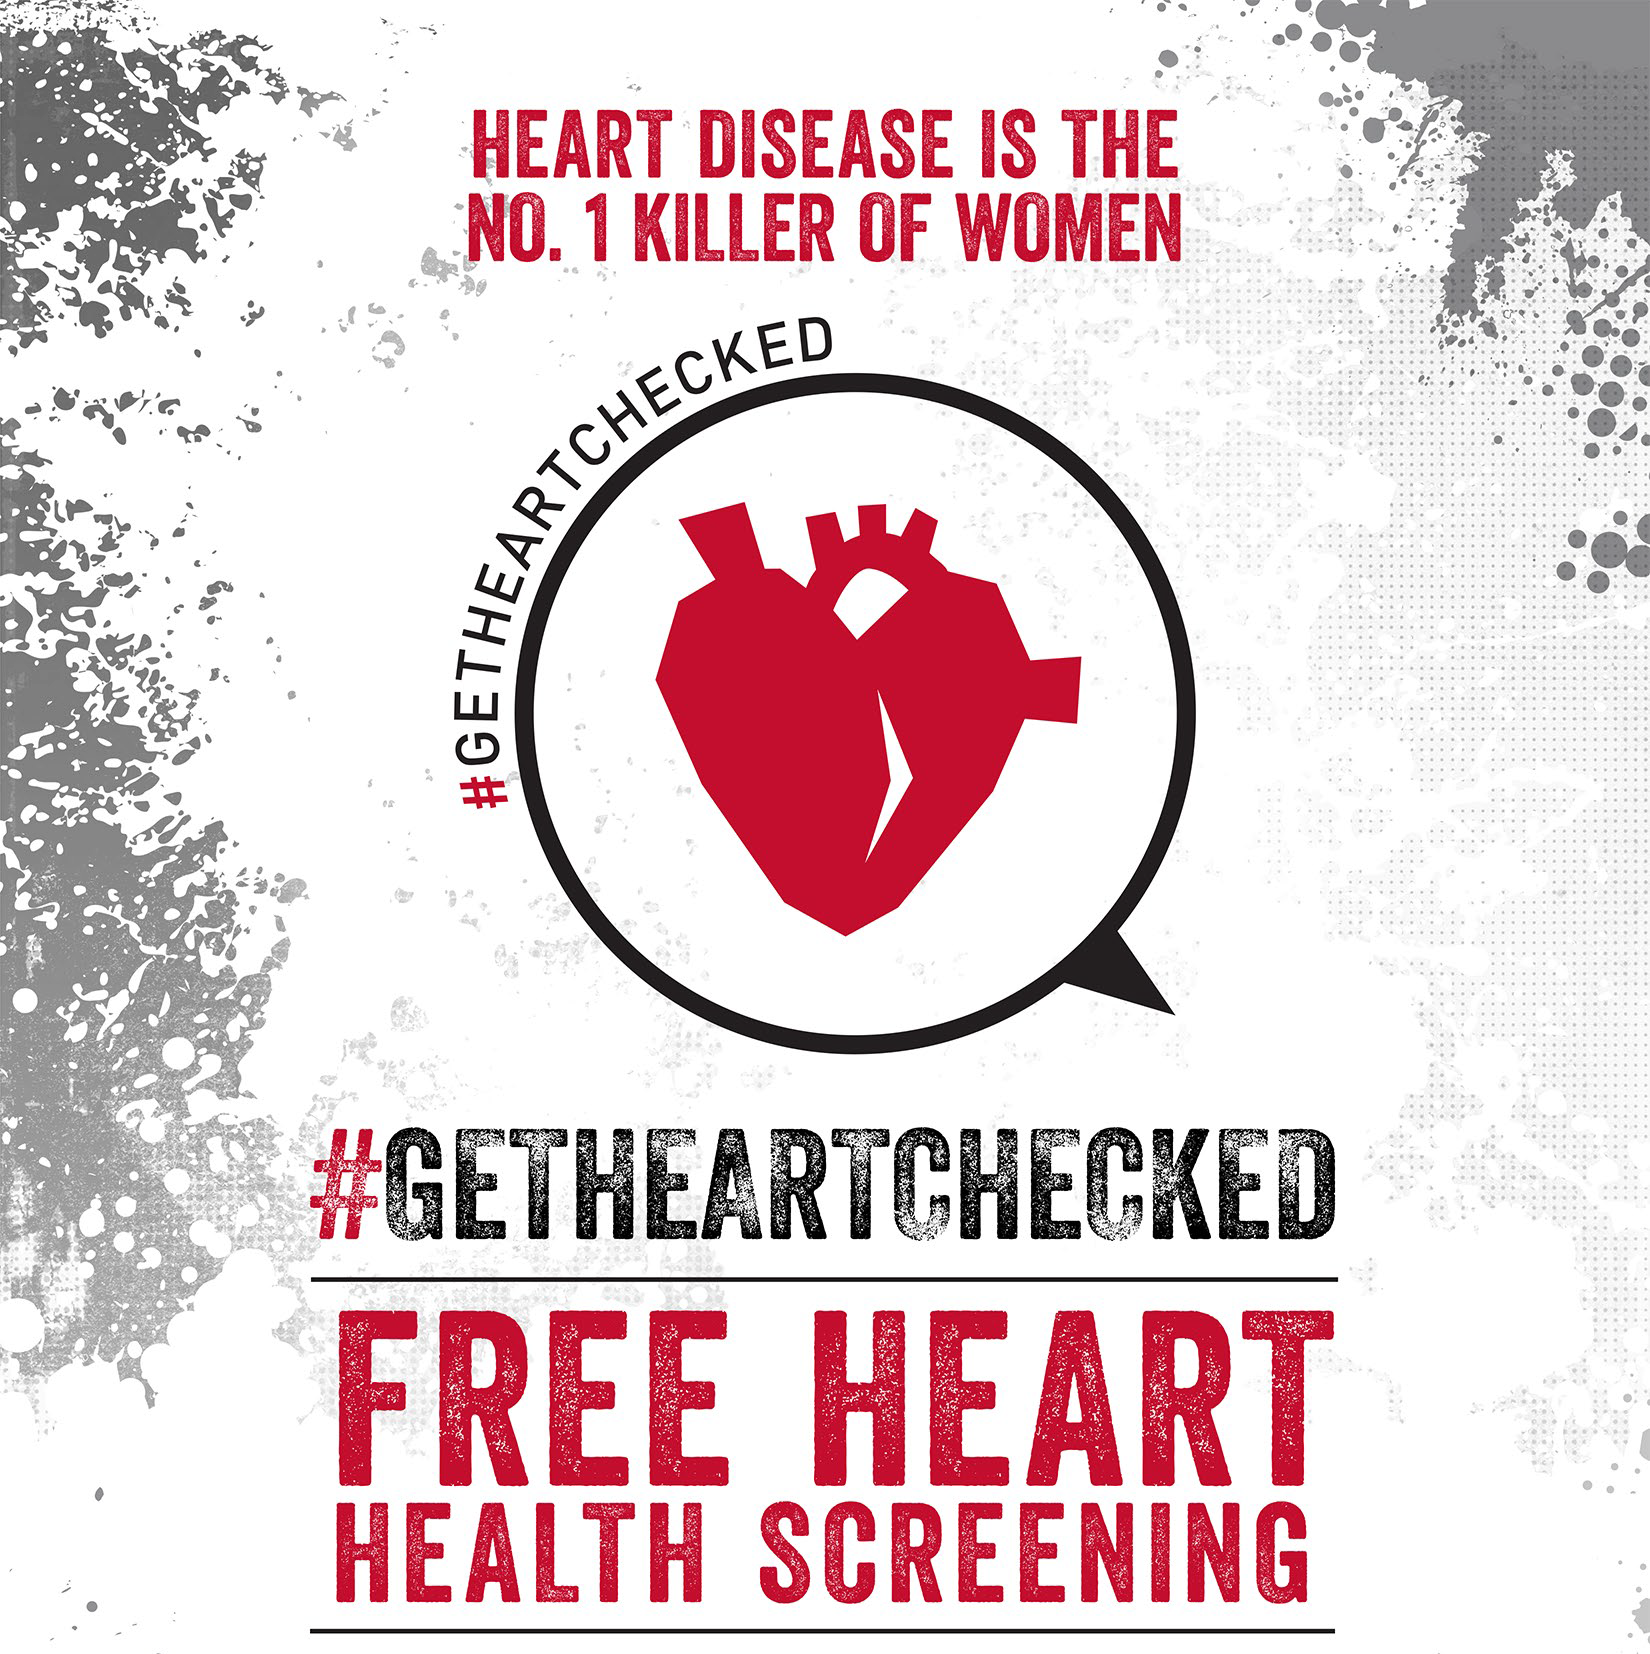 Get heart checked